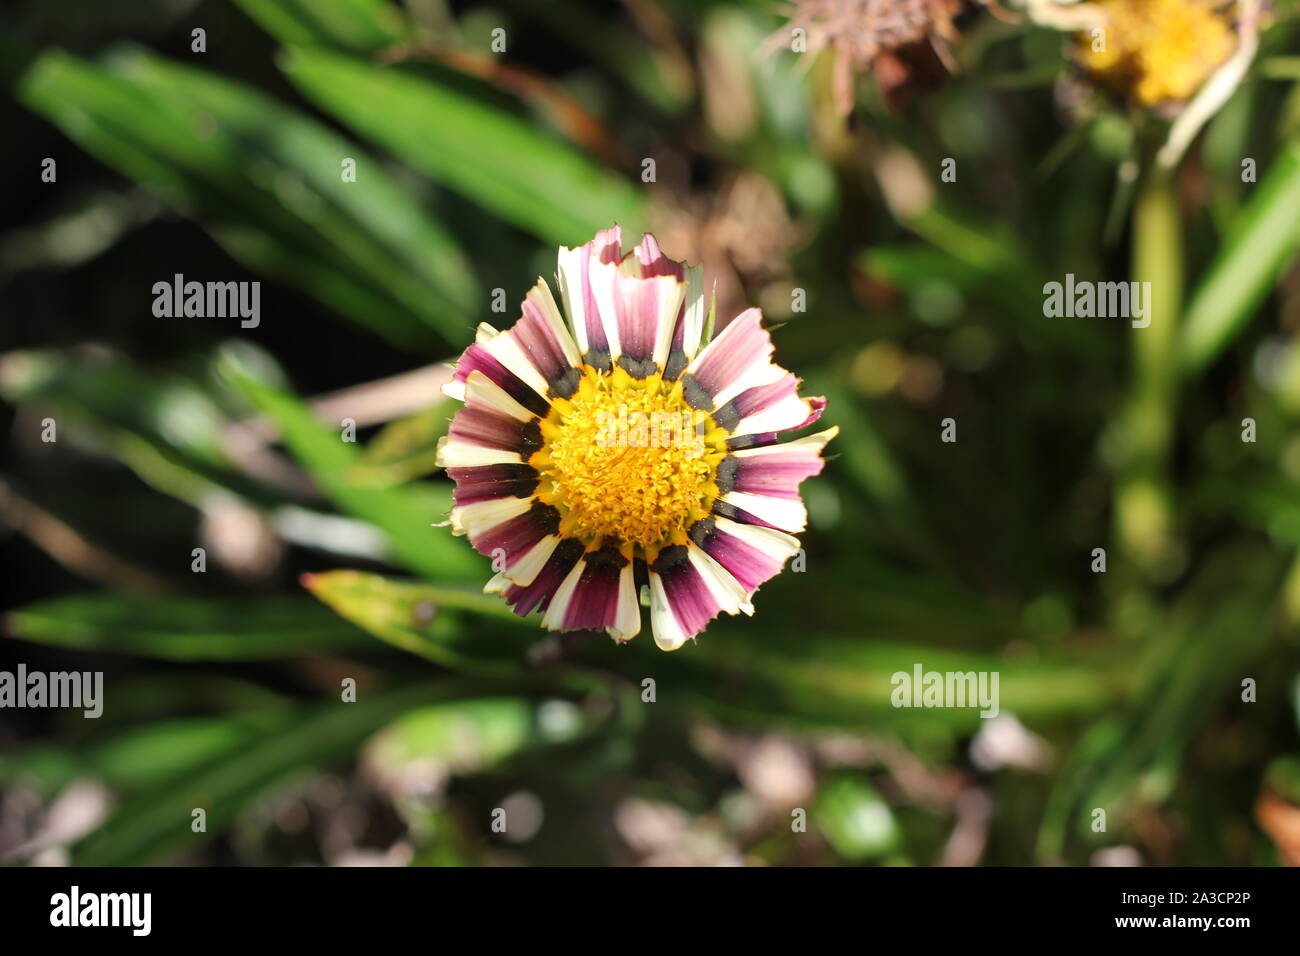 Midday flower with big yellow eye and pink-white striped petals. The petals running out like feathers. Flower looks elegant and exotic. Stock Photo